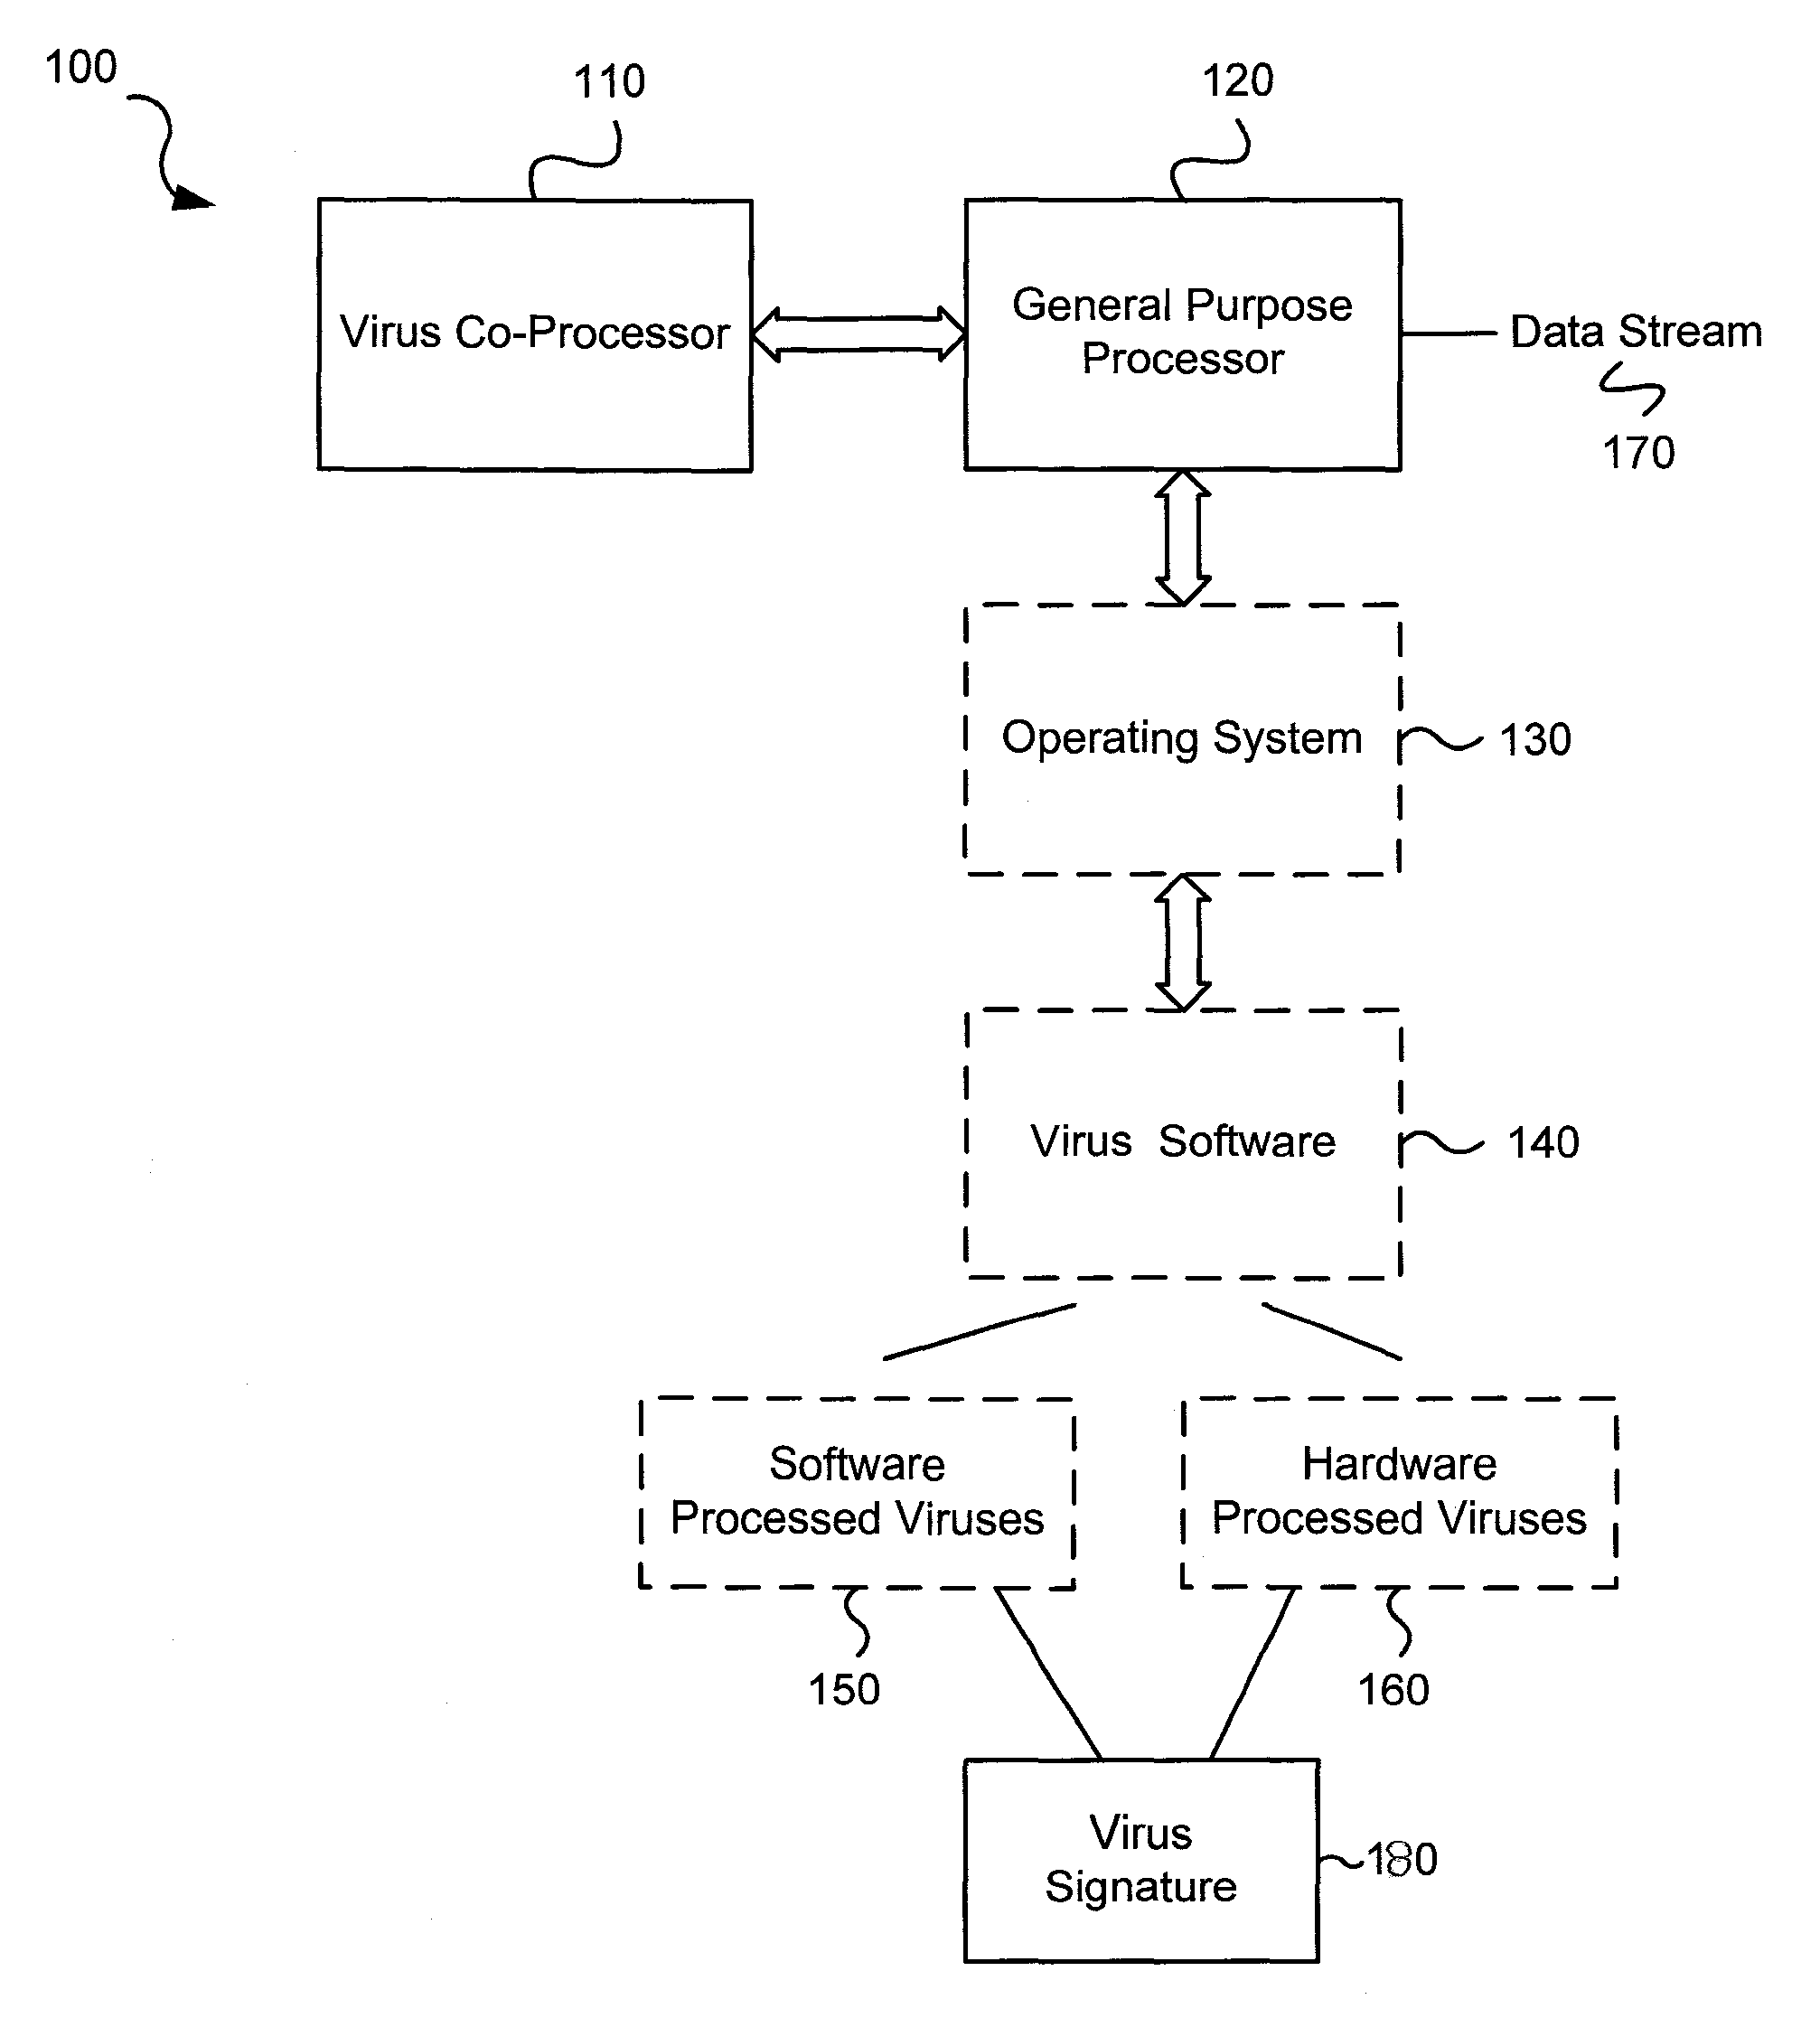 Virus co-processor instructions and methods for using such